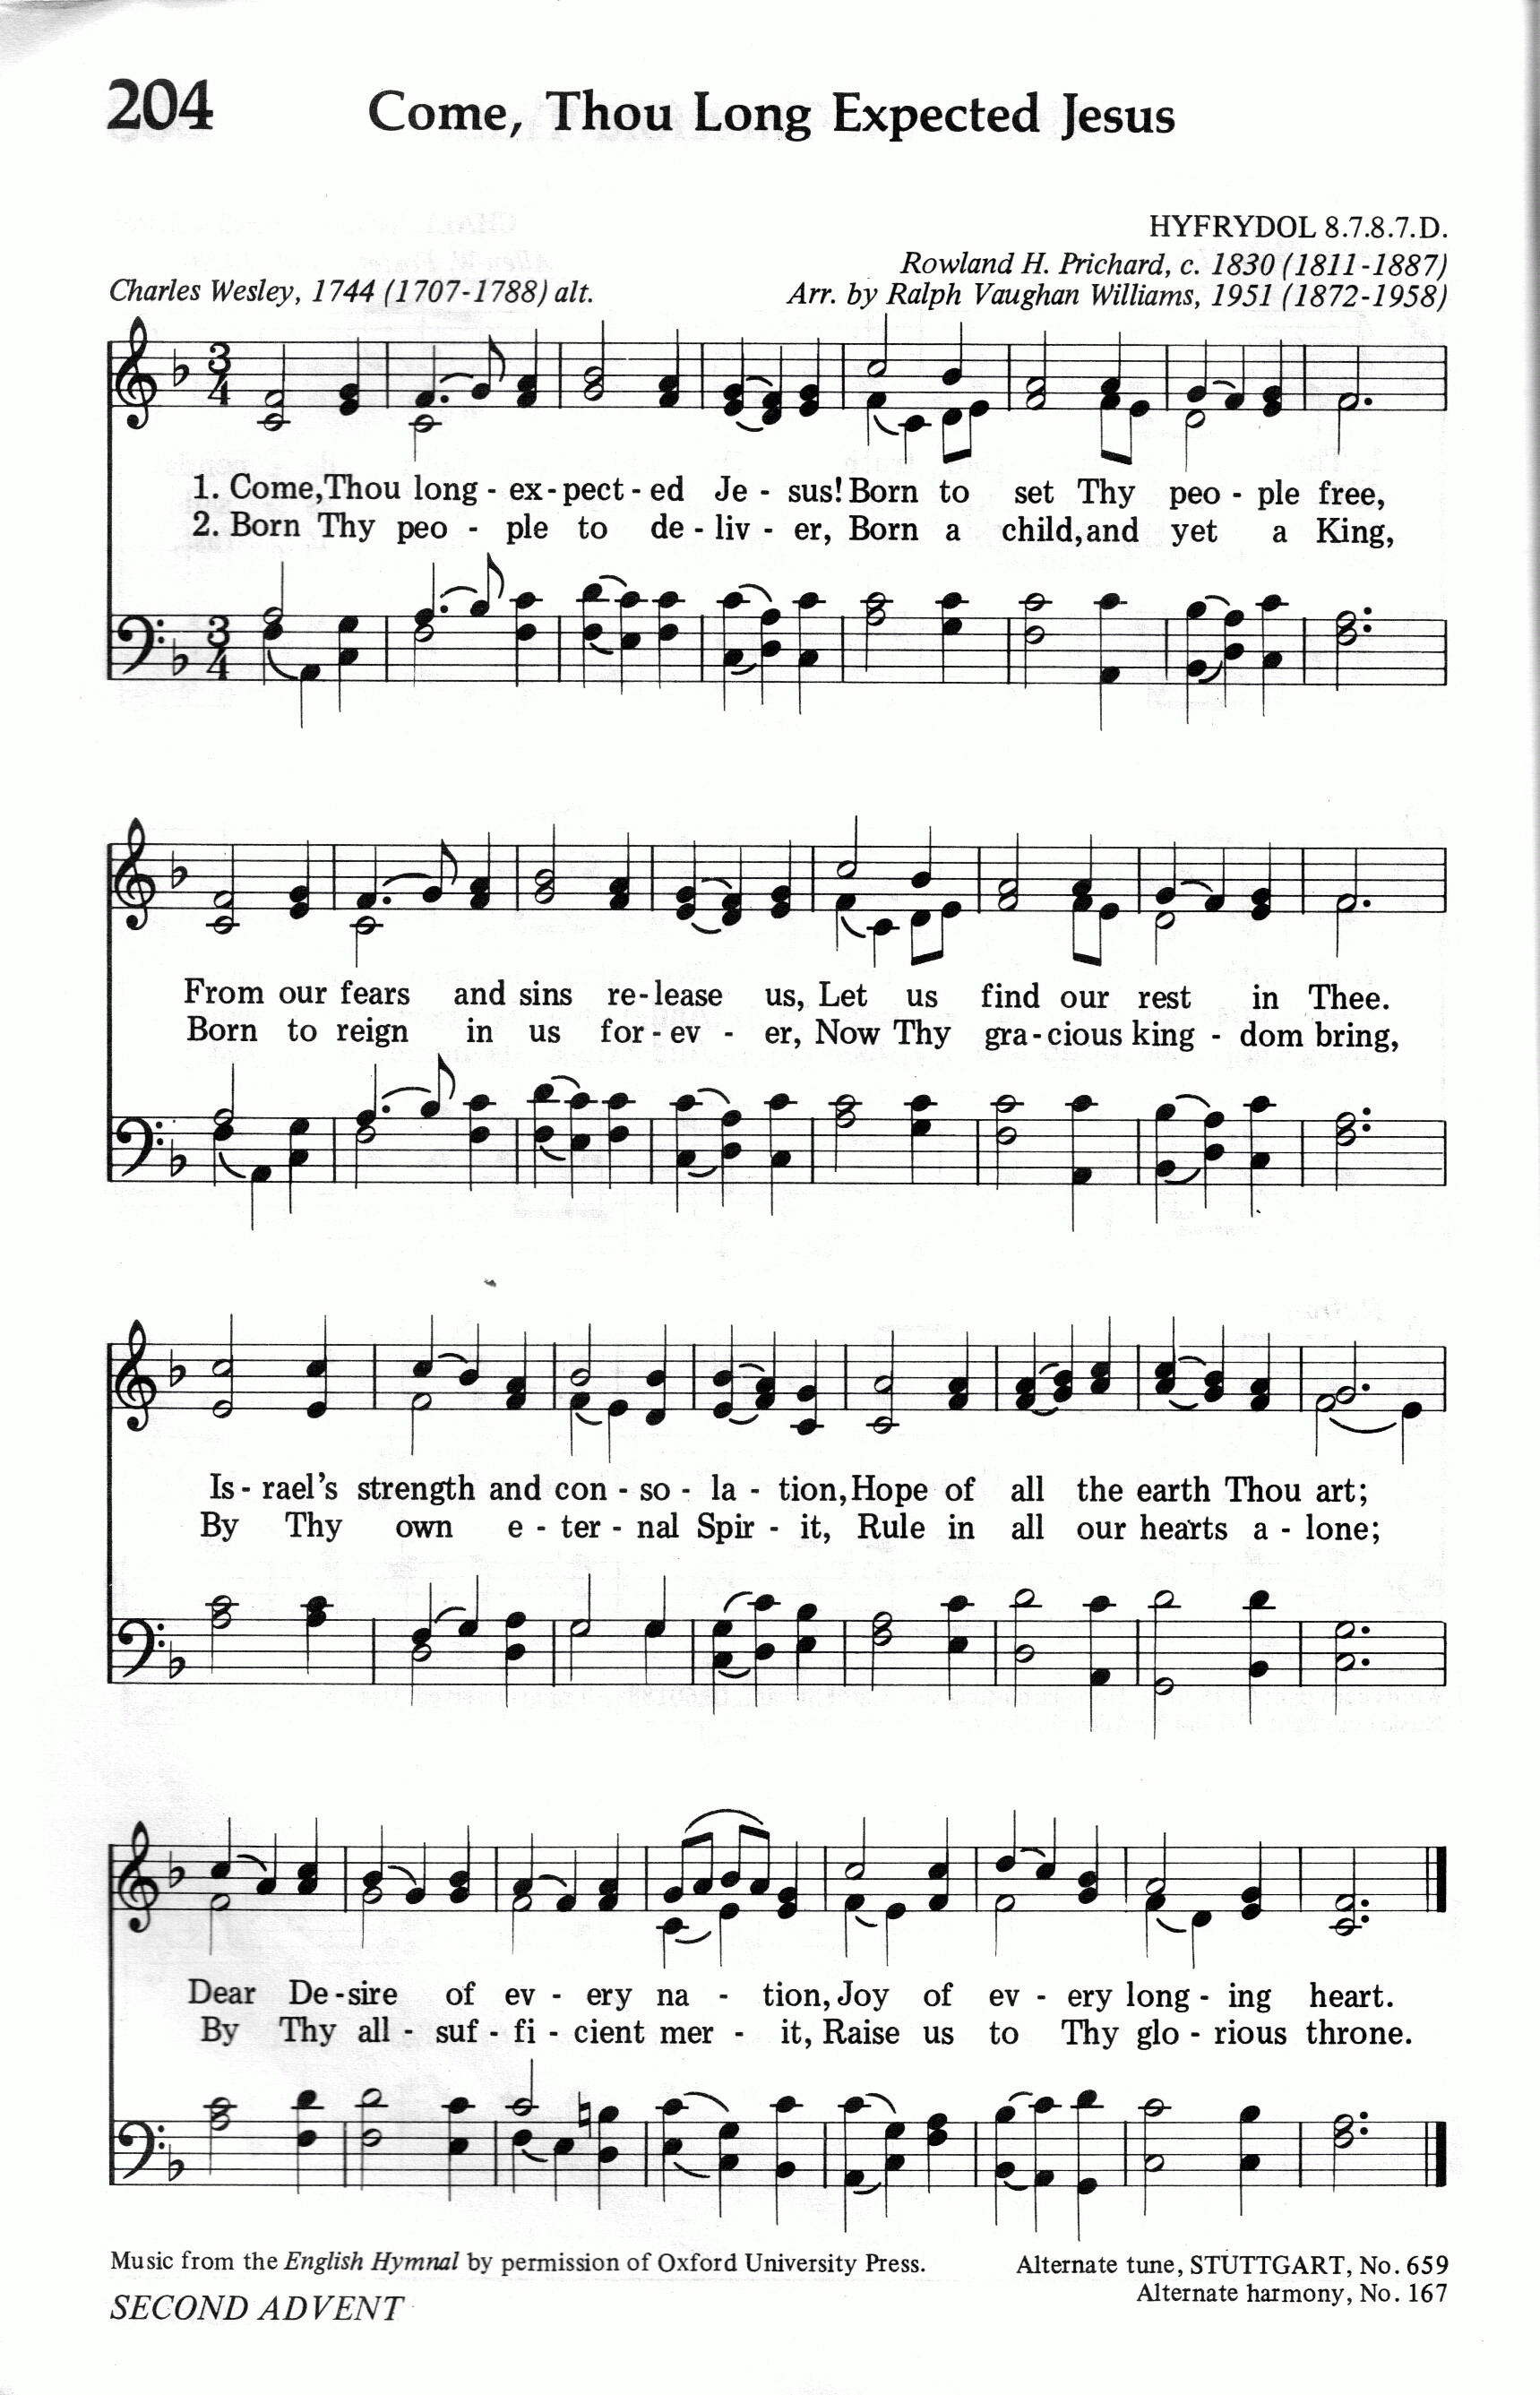 204.Come, Thou Long Expected Jesus-695HYMN